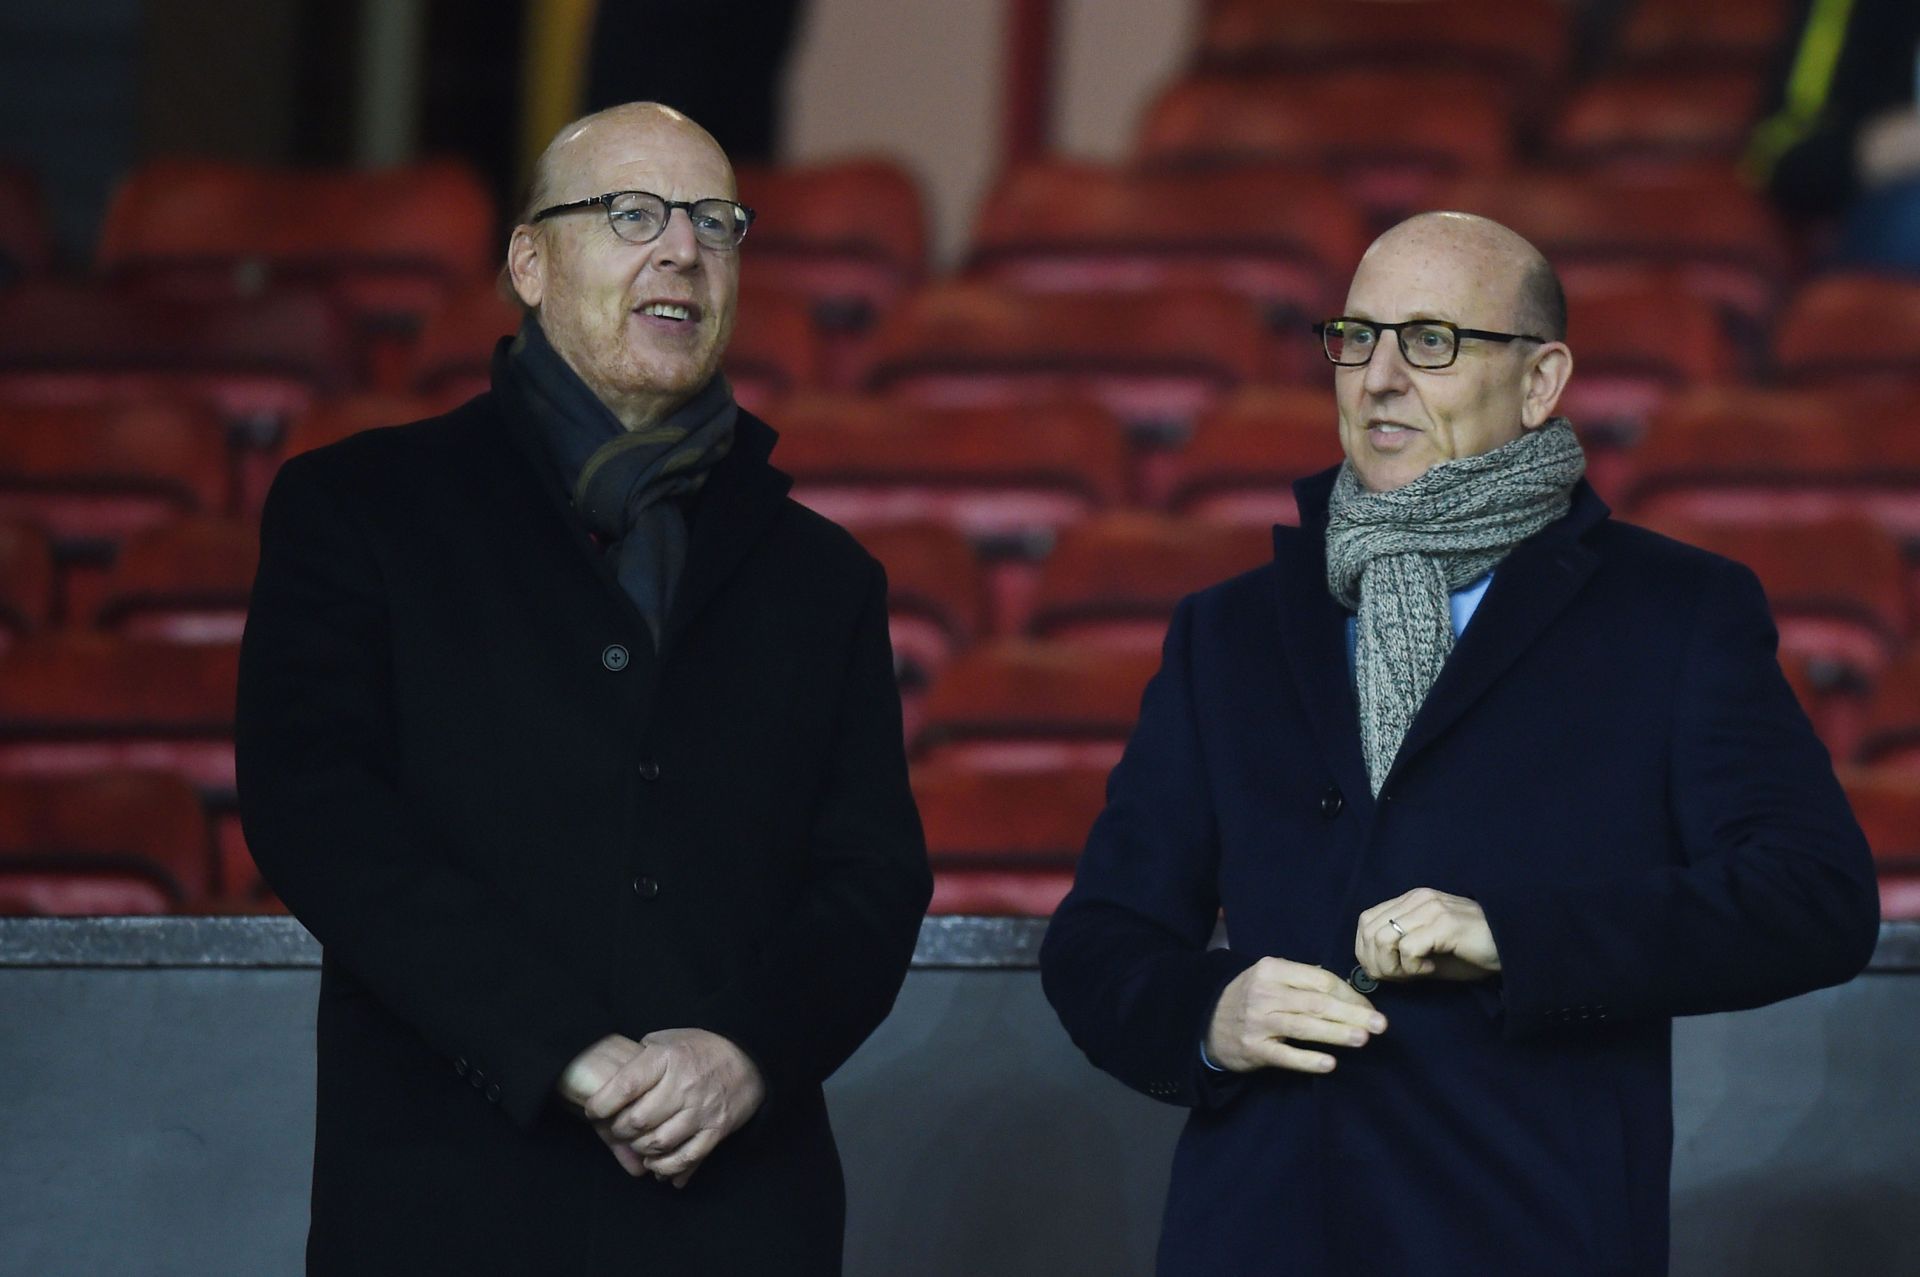 The Glazers are looking to sell